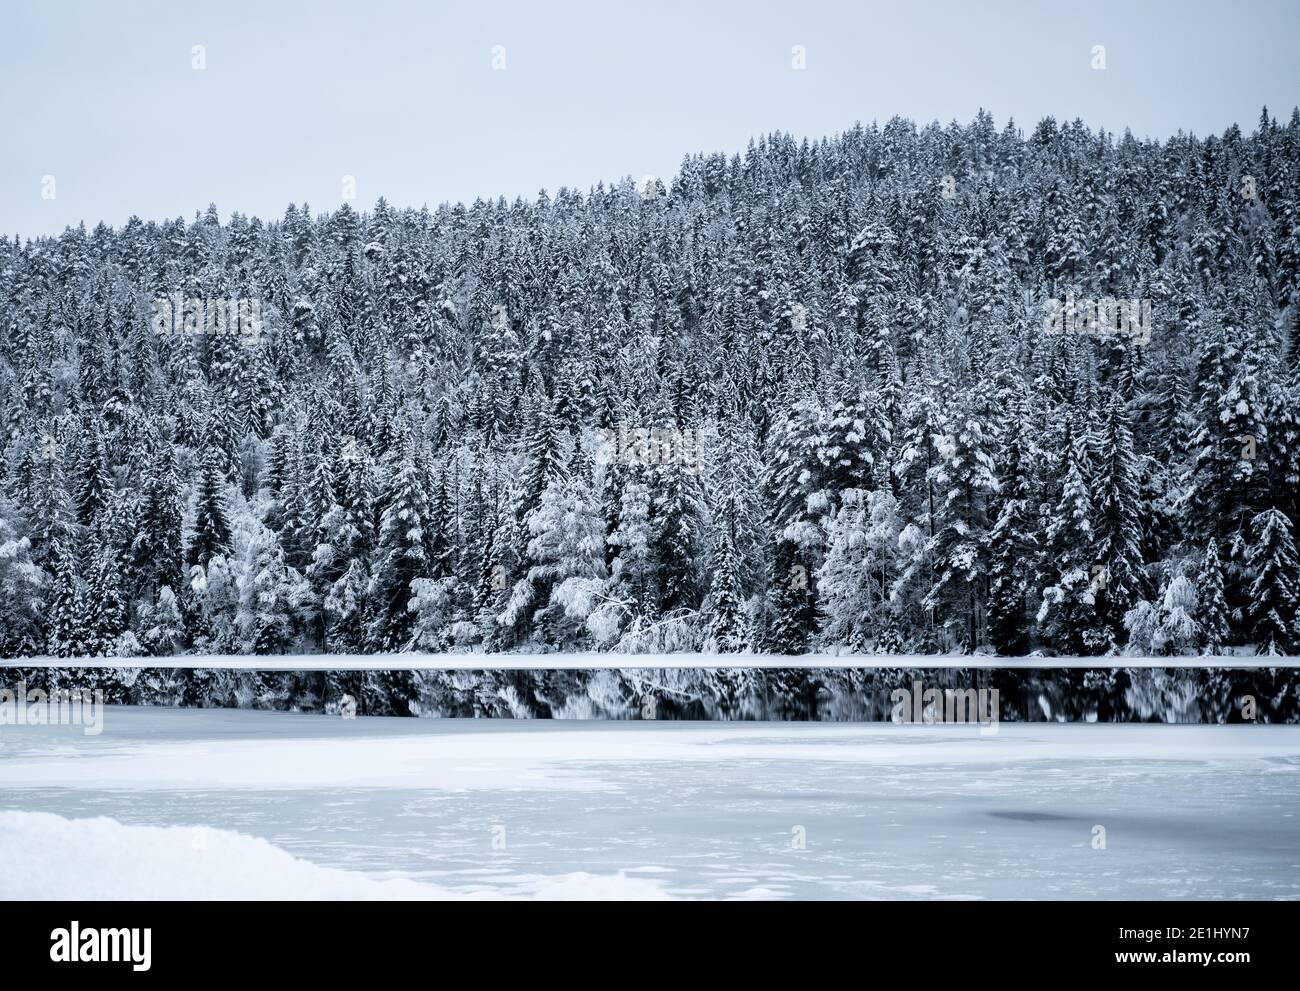 Partly frozen lake and snow covered pine trees in a wilderness winter landscape. Stock Photo